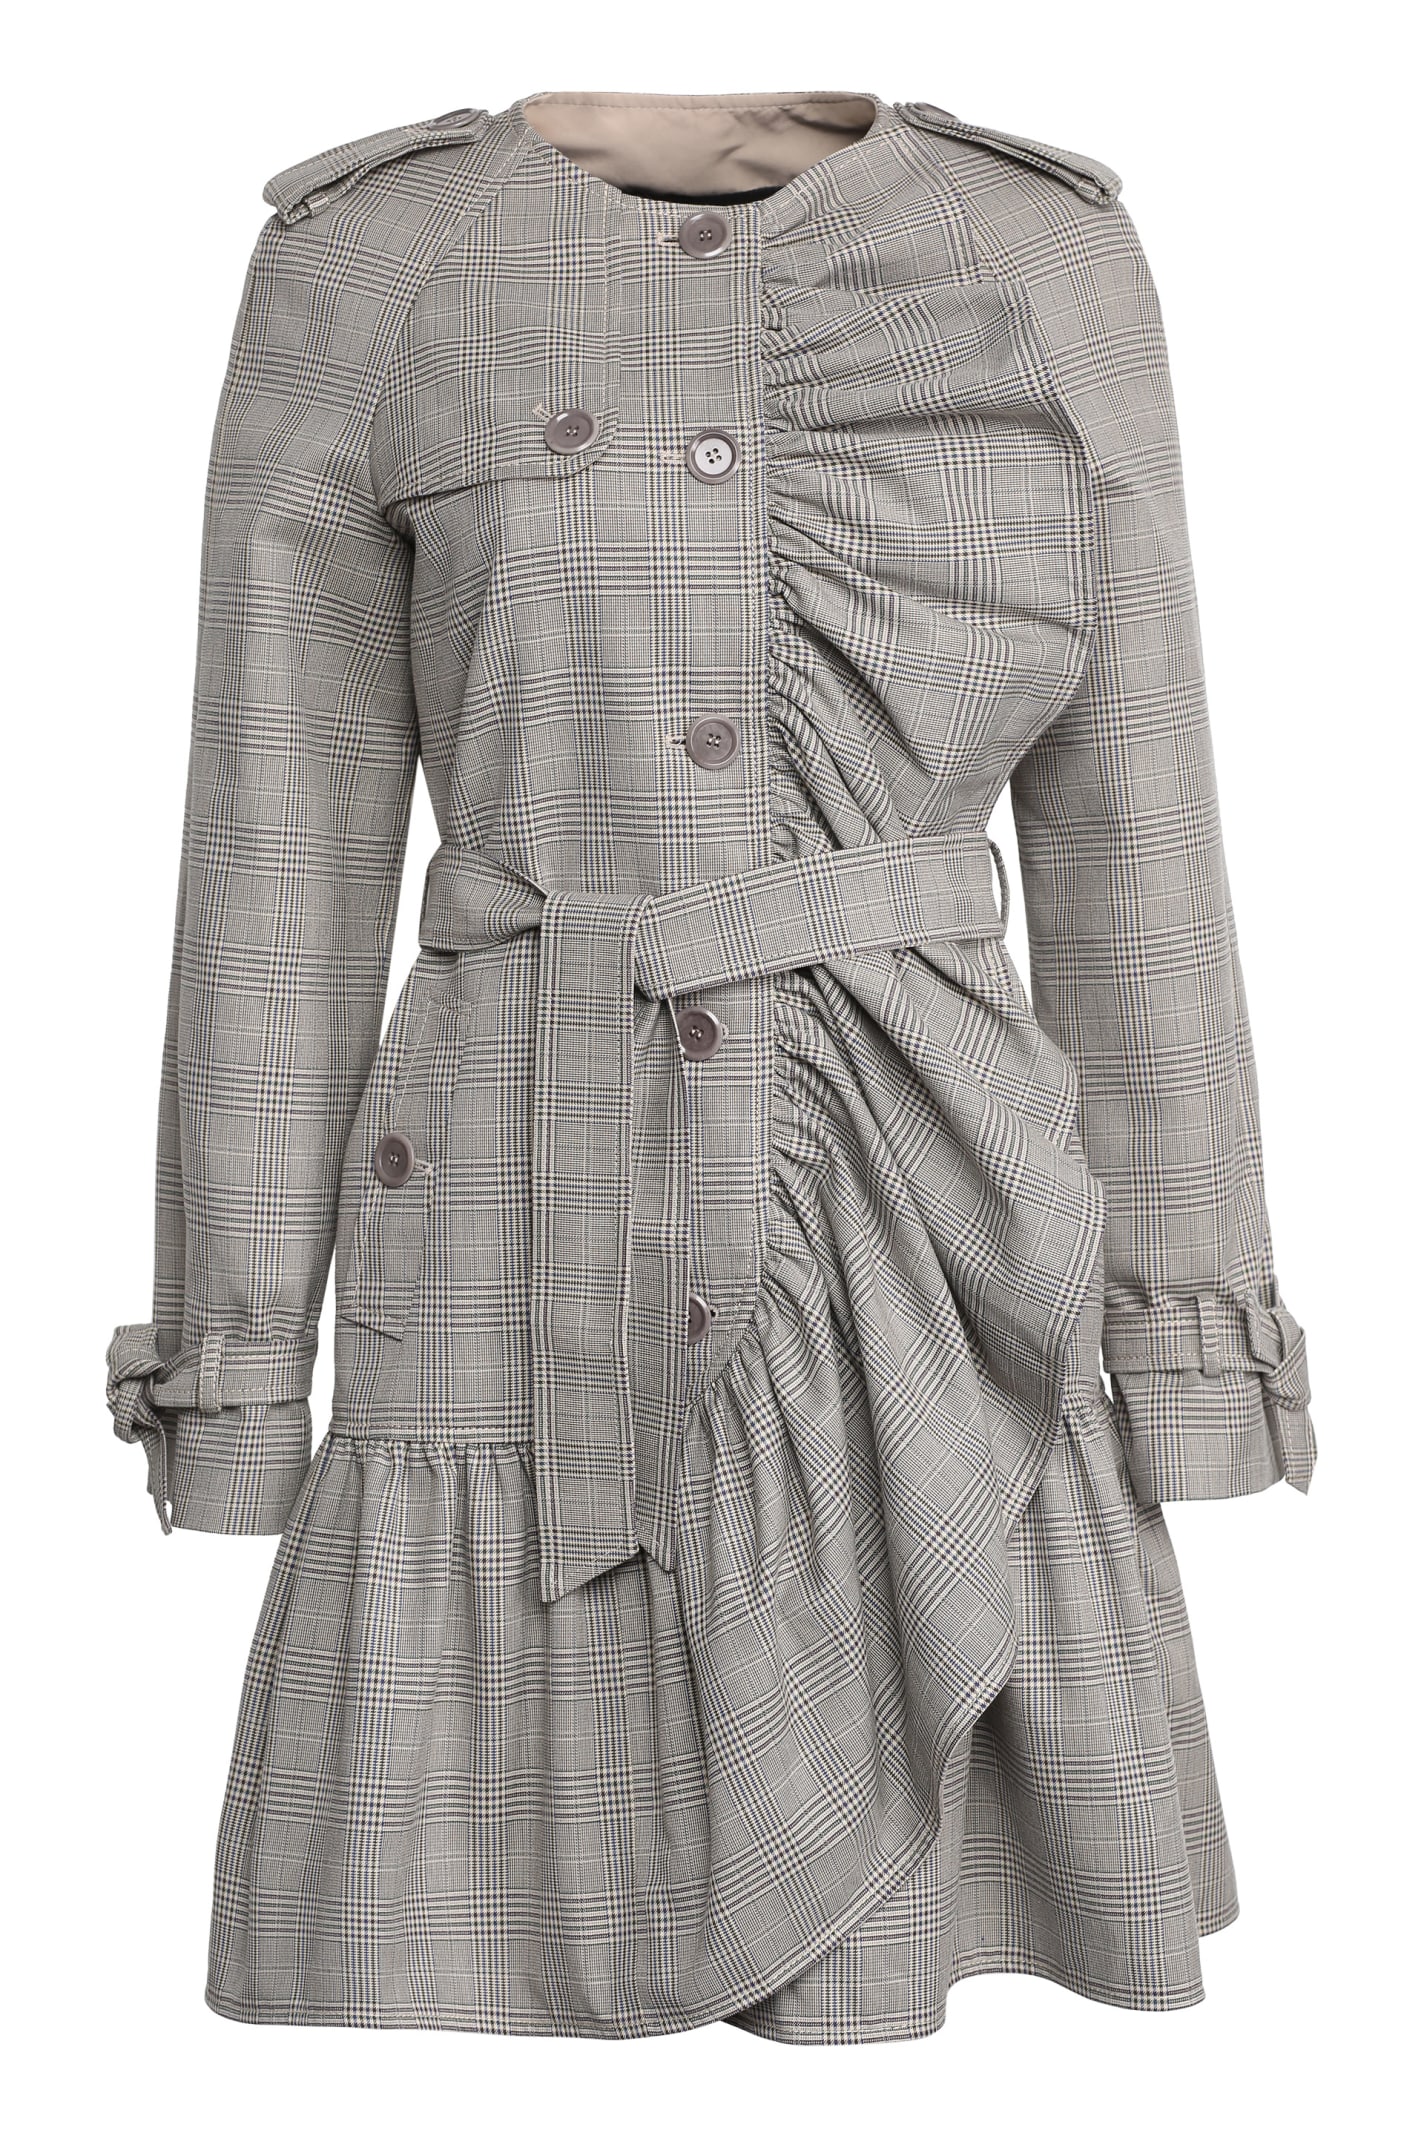 Boutique Moschino Prince-of-wales Checked Coat